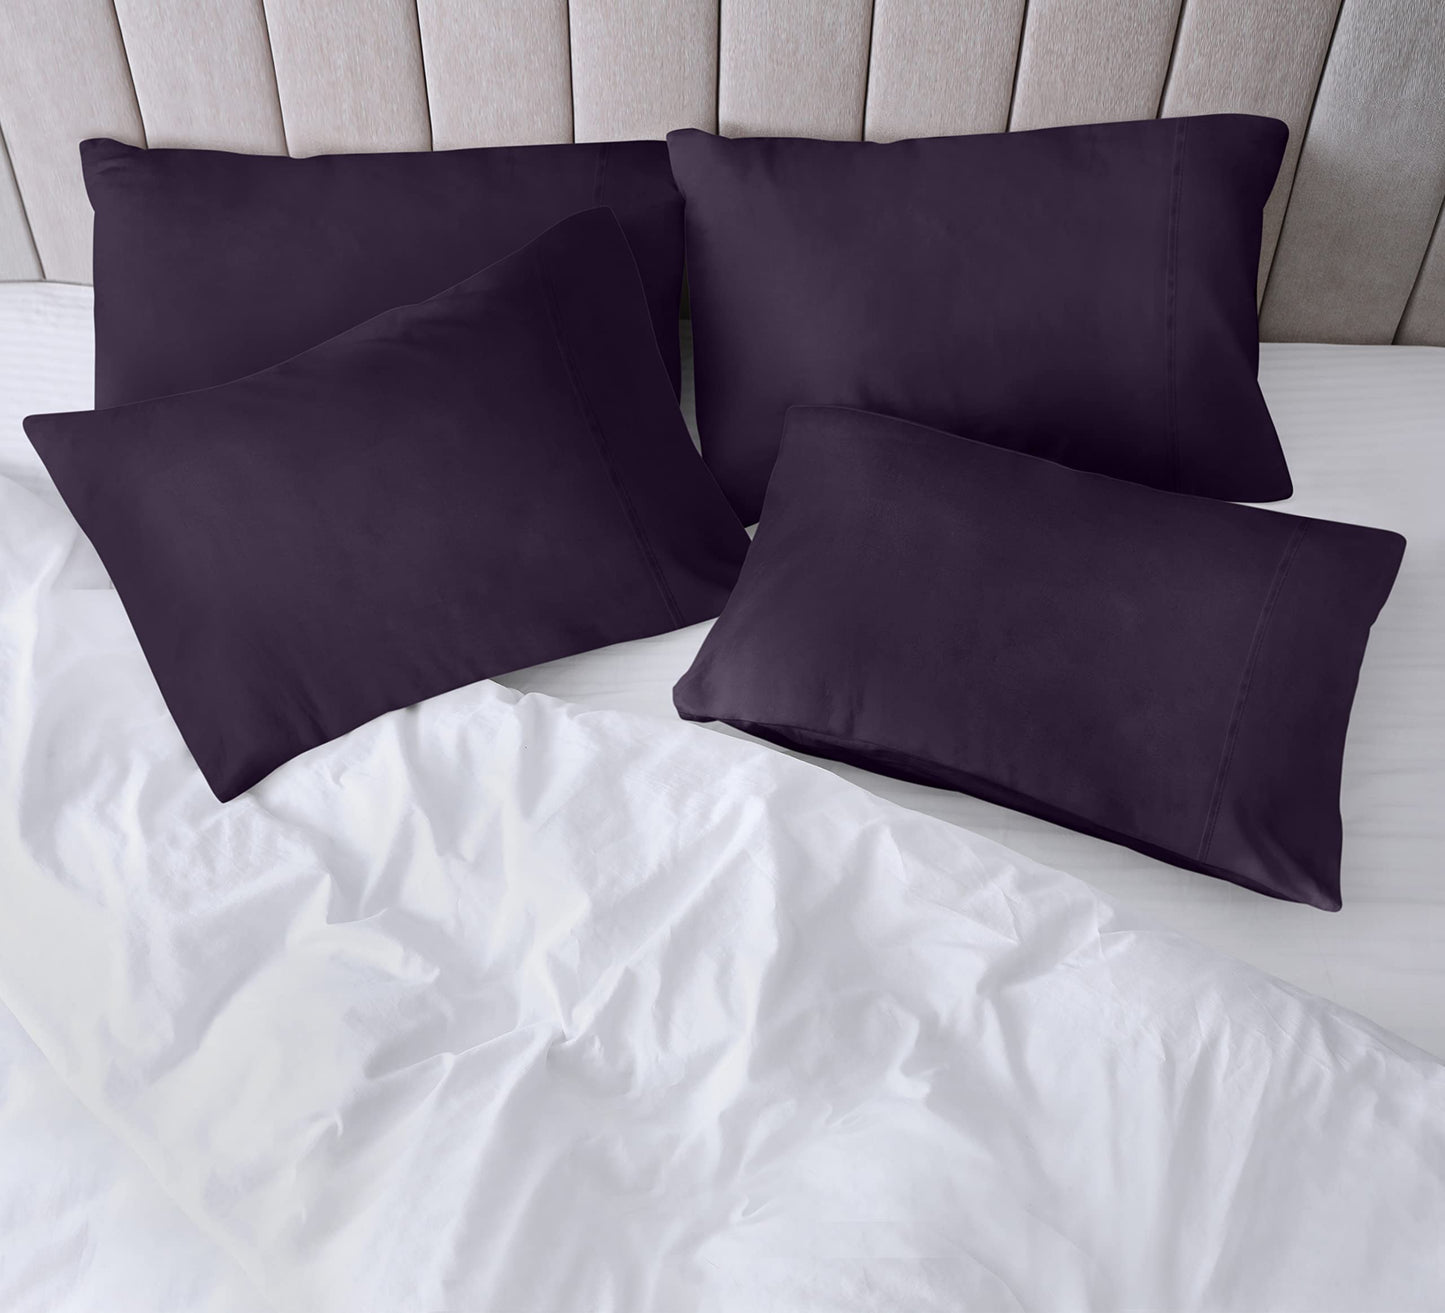 Utopia Bedding King Pillow Cases - 4 Pack - Envelope Closure - Soft Brushed Microfiber Fabric - Shrinkage and Fade Resistant Pillow Cases 20 X 40 (King, Purple)